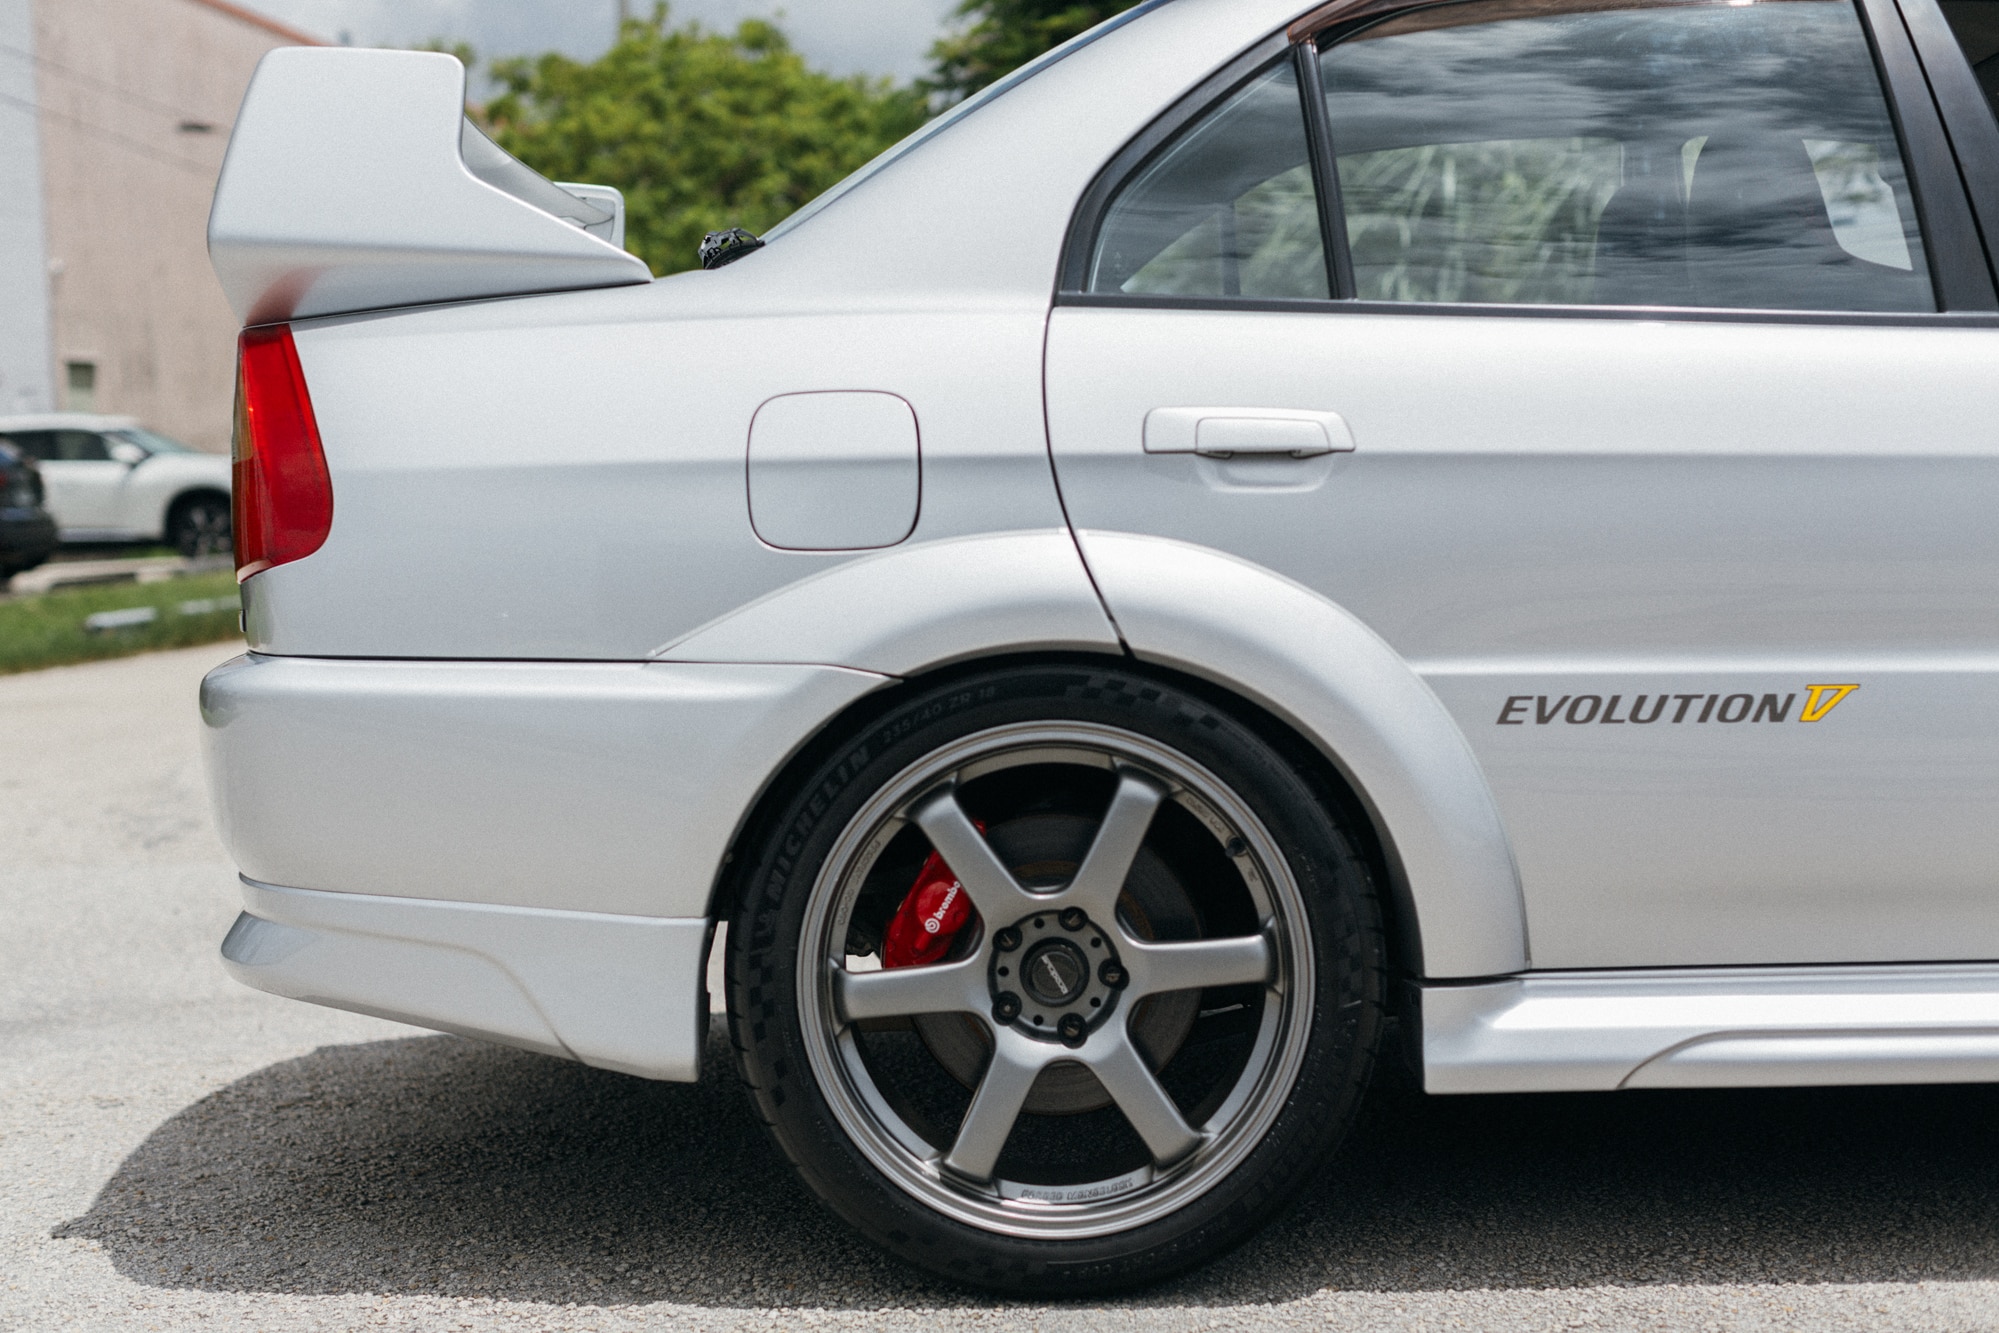 1998 Mitsubishi Lancer Evolution V GSR (CP9A)| 1 of 1,903 | Mint Condition | Extremely Dialed-in Suspension Setup | Blitz ZZR Coilovers | Cusco Bits | Michelin Sport Cup 2 | Boost Up | Ralliart Exhaust | Gruppe M Intake | OEM++